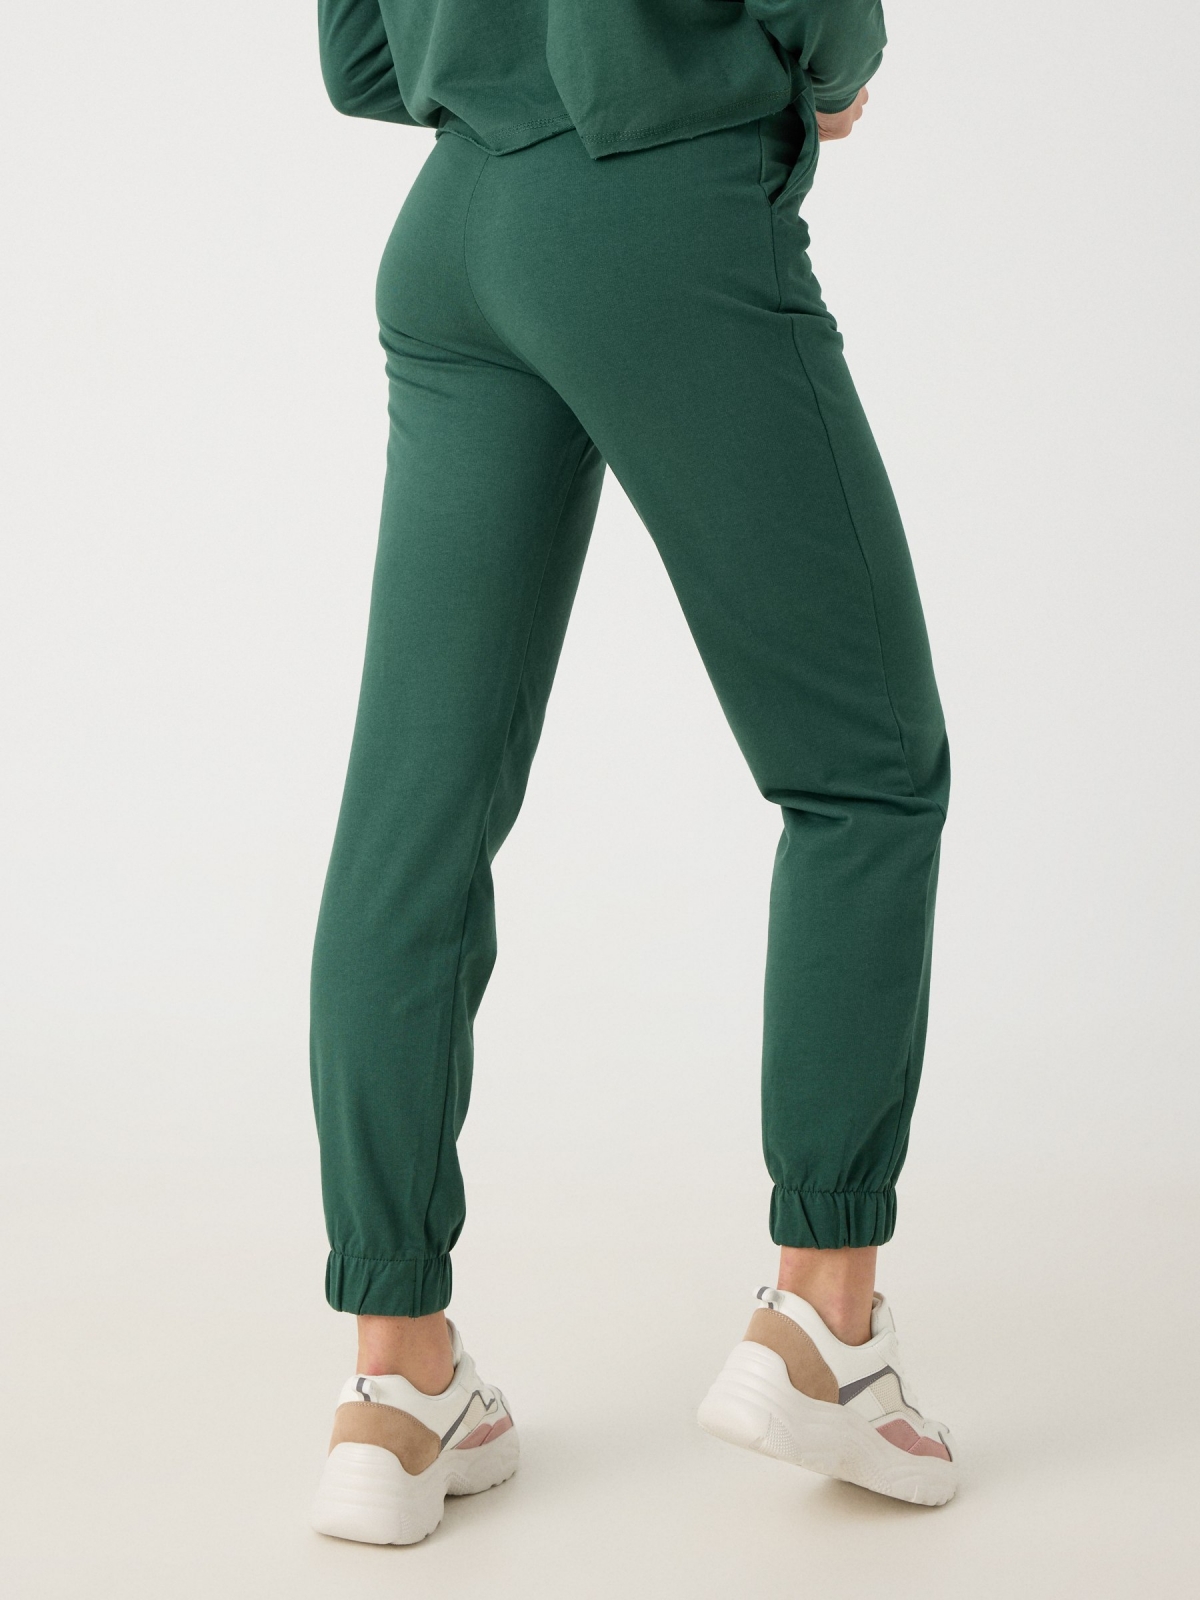 Jogger pants dark green middle back view